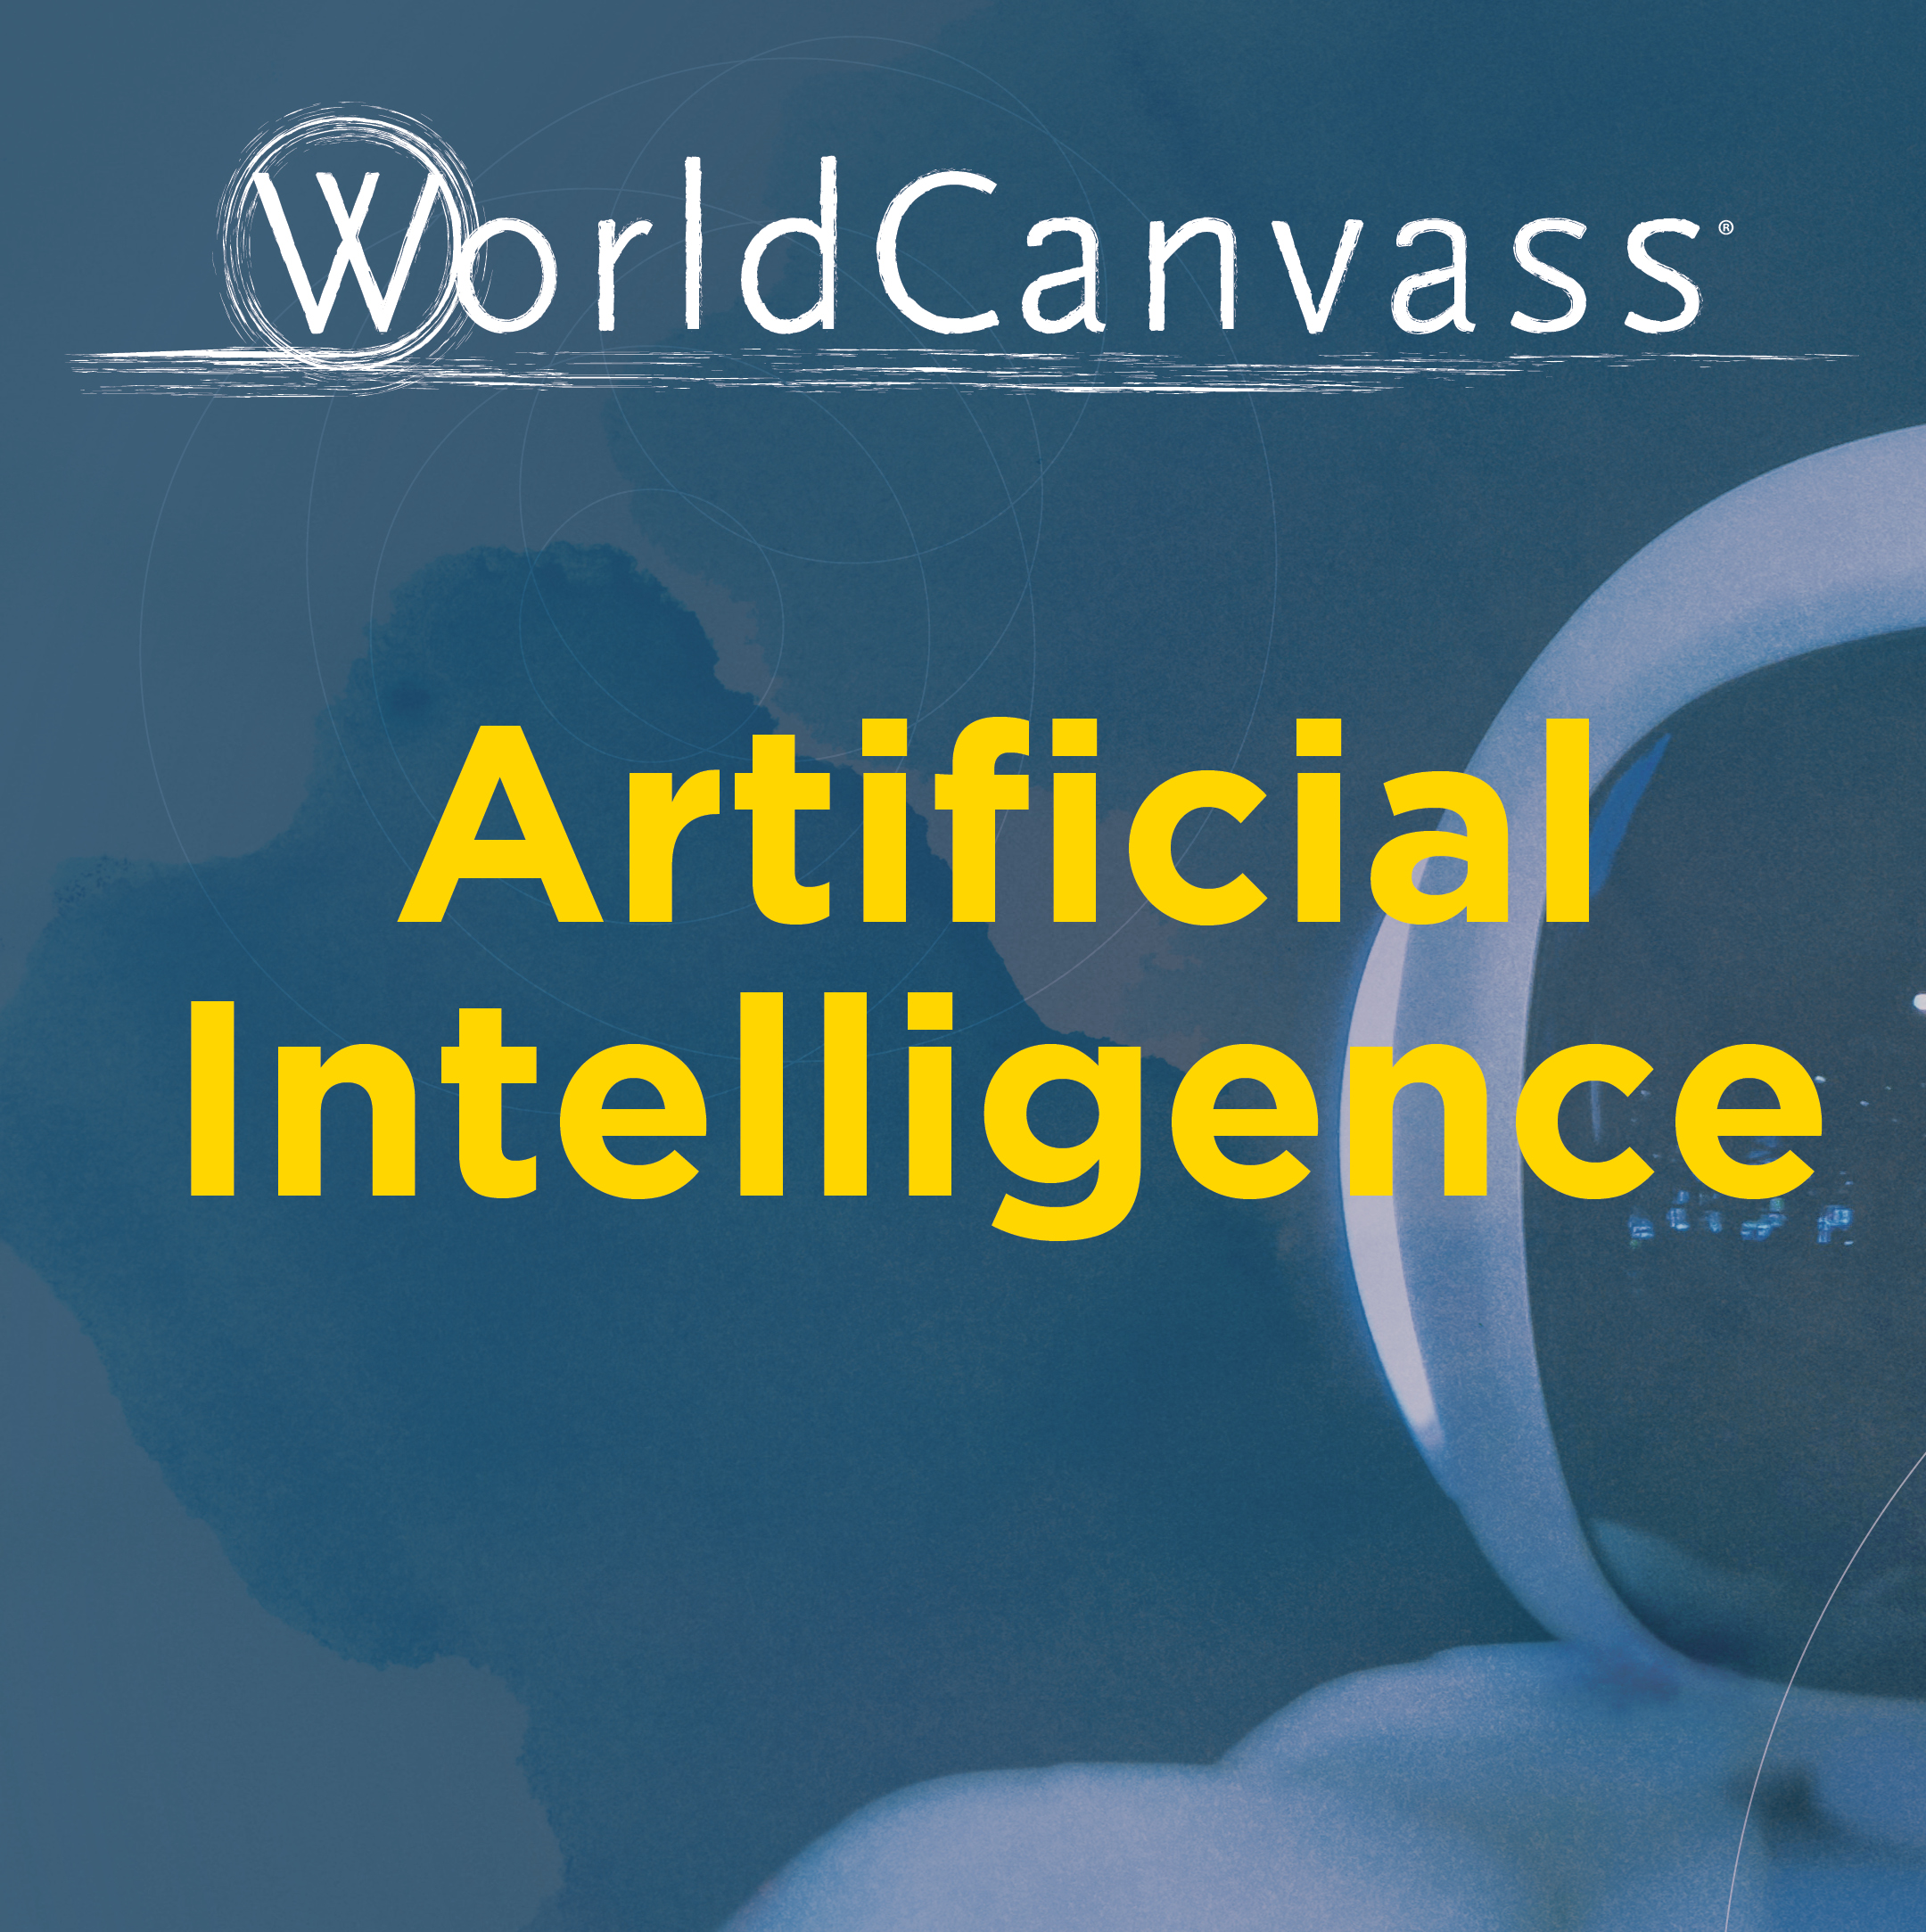 WorldCanvass: Artificial Intelligence promotional image